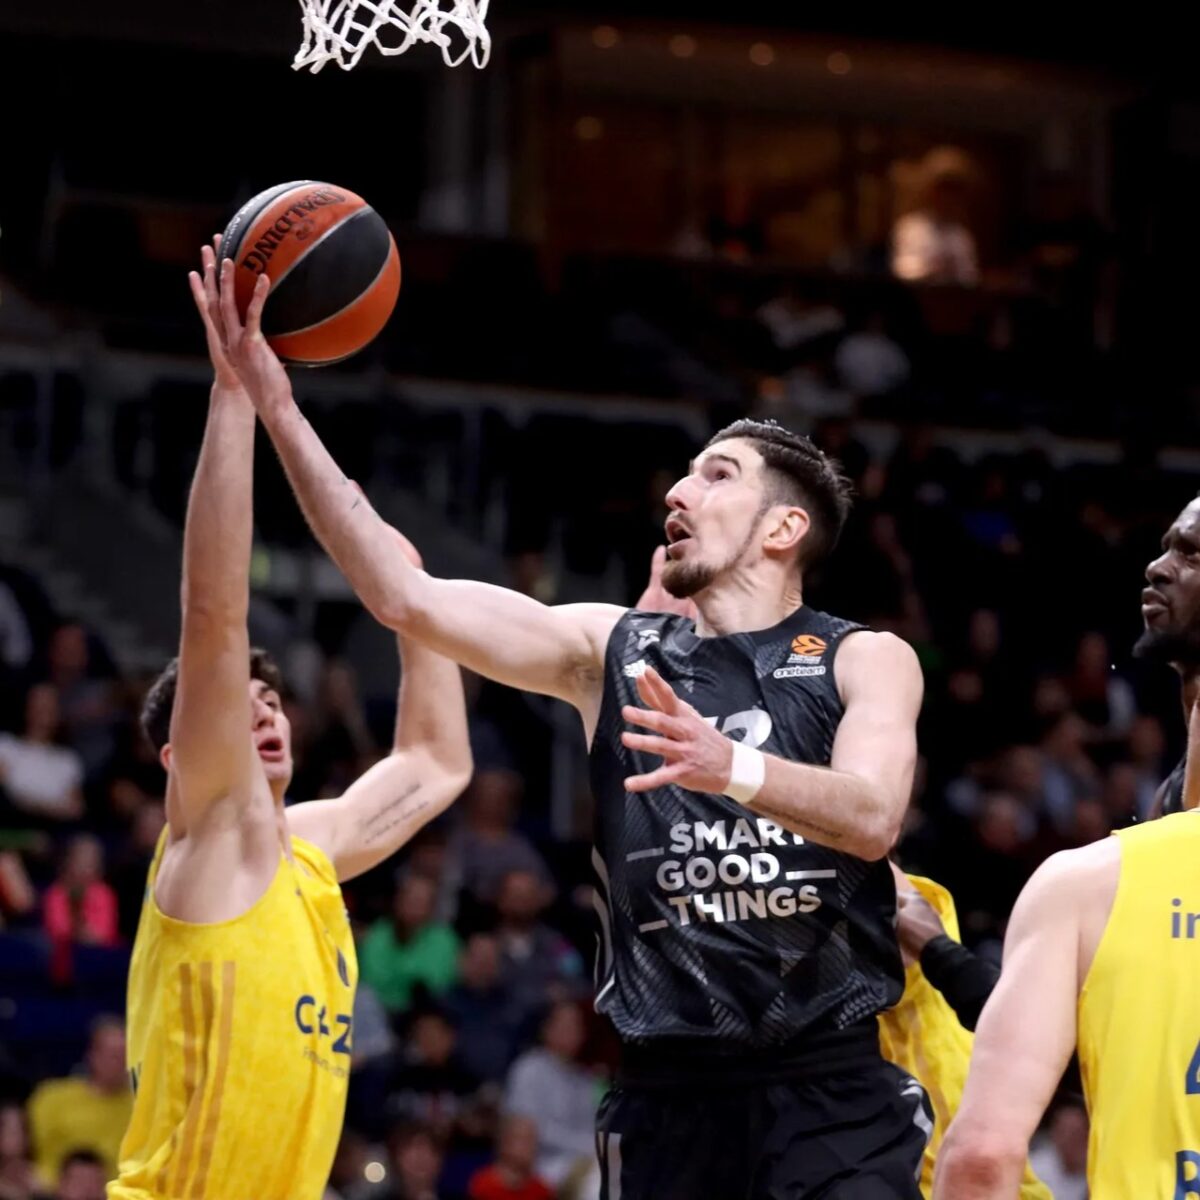 Nando de Colo is the biggest star at the disposal of TJ Parker and LDLC Asvel going into this Euroleague Basketball season